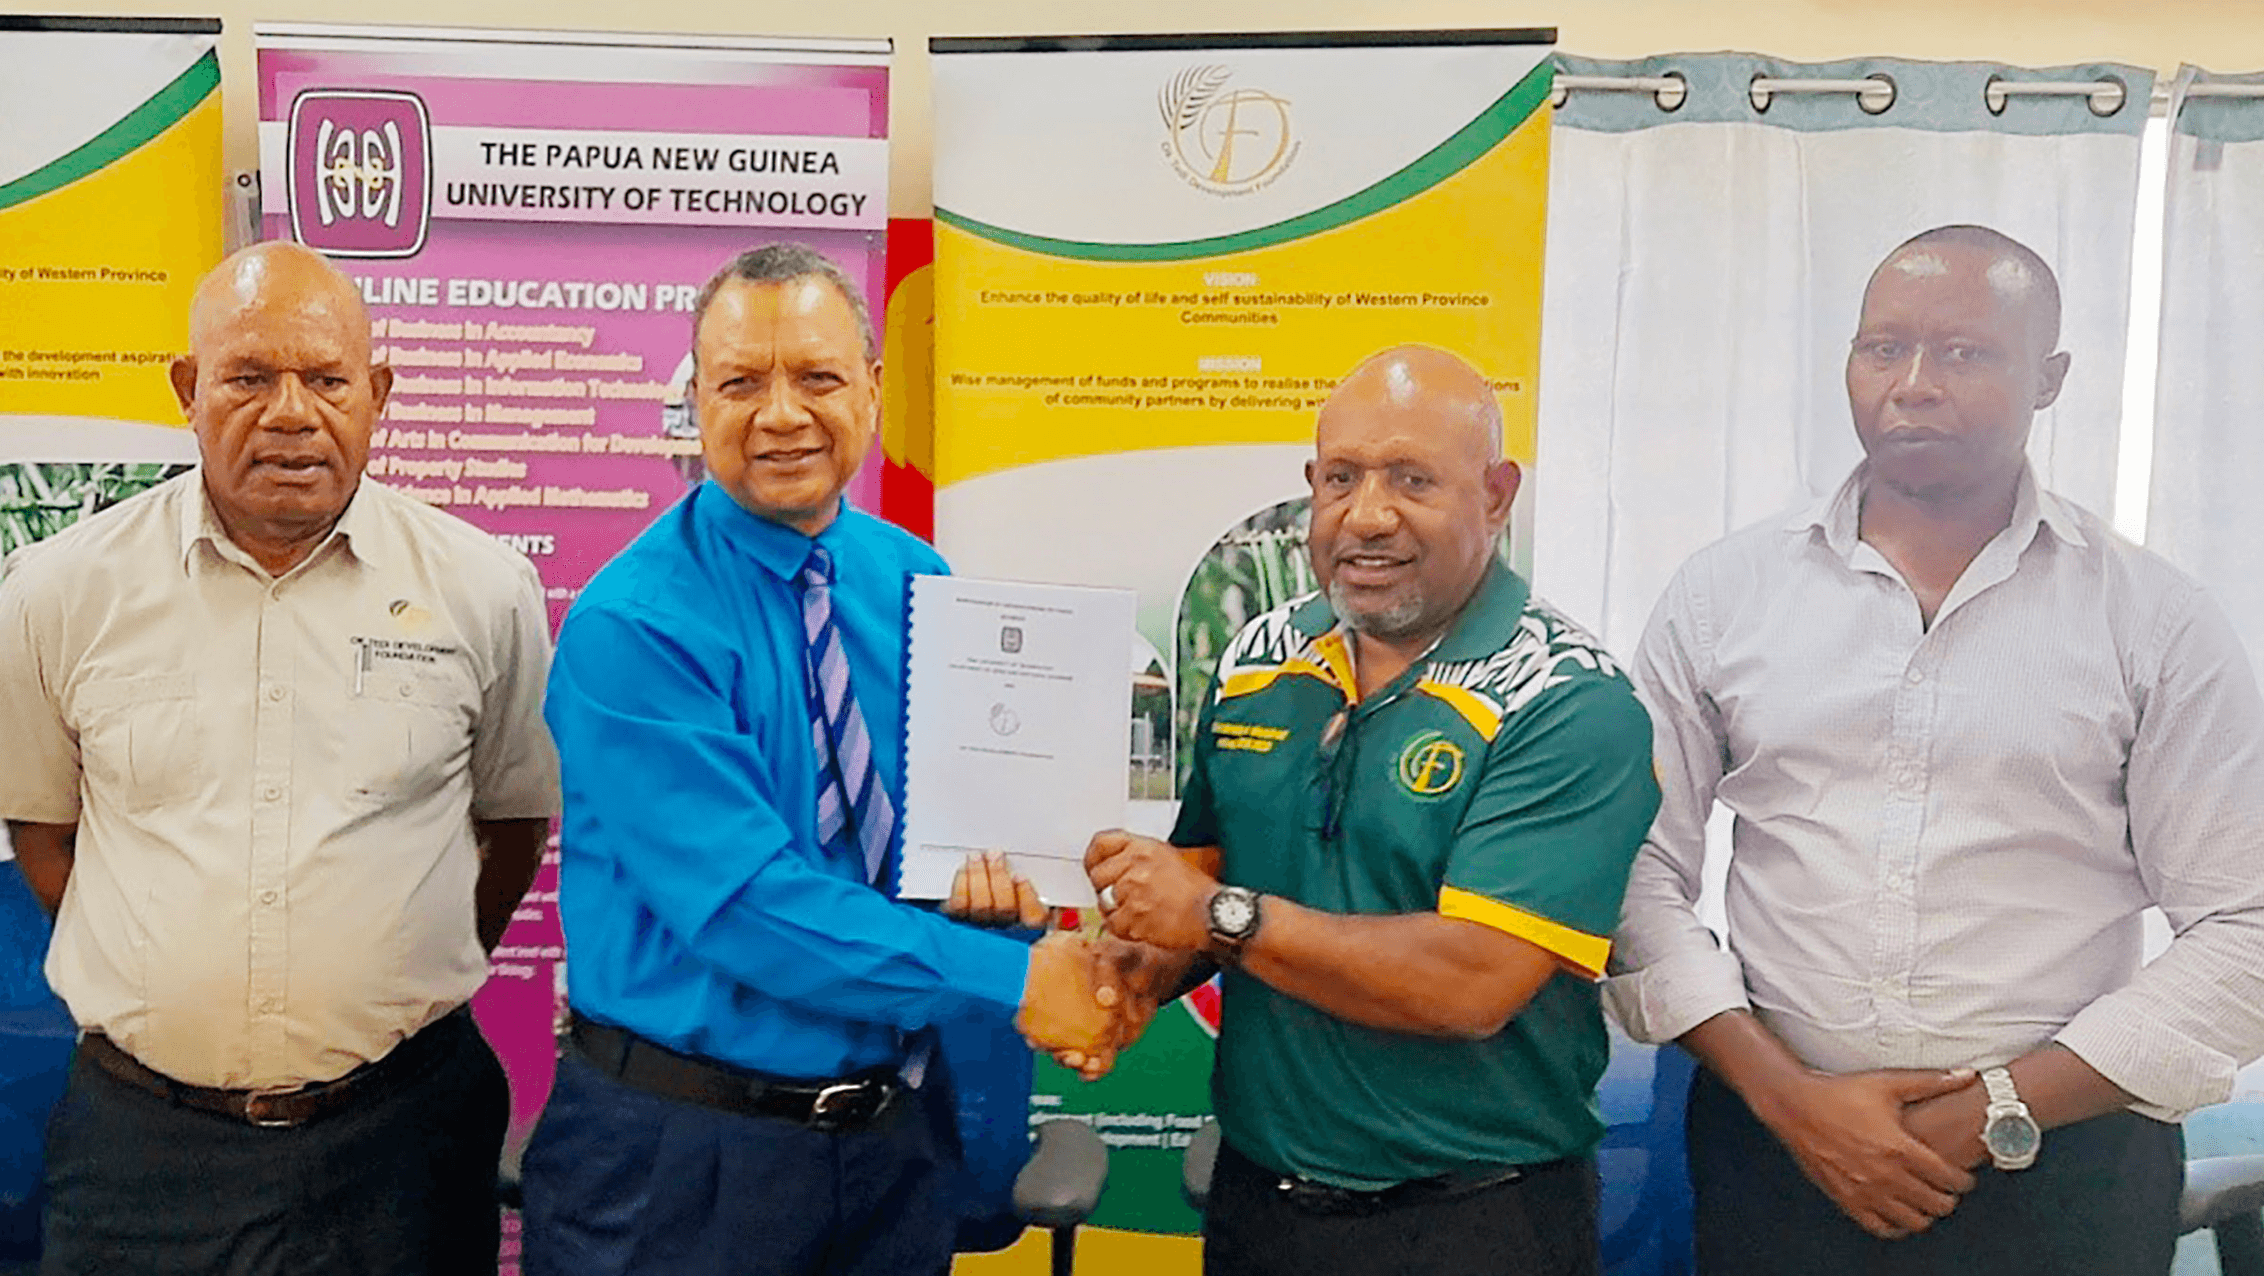 UNITECH & OTDF Sign MOU to Educate Students in Remote Areas